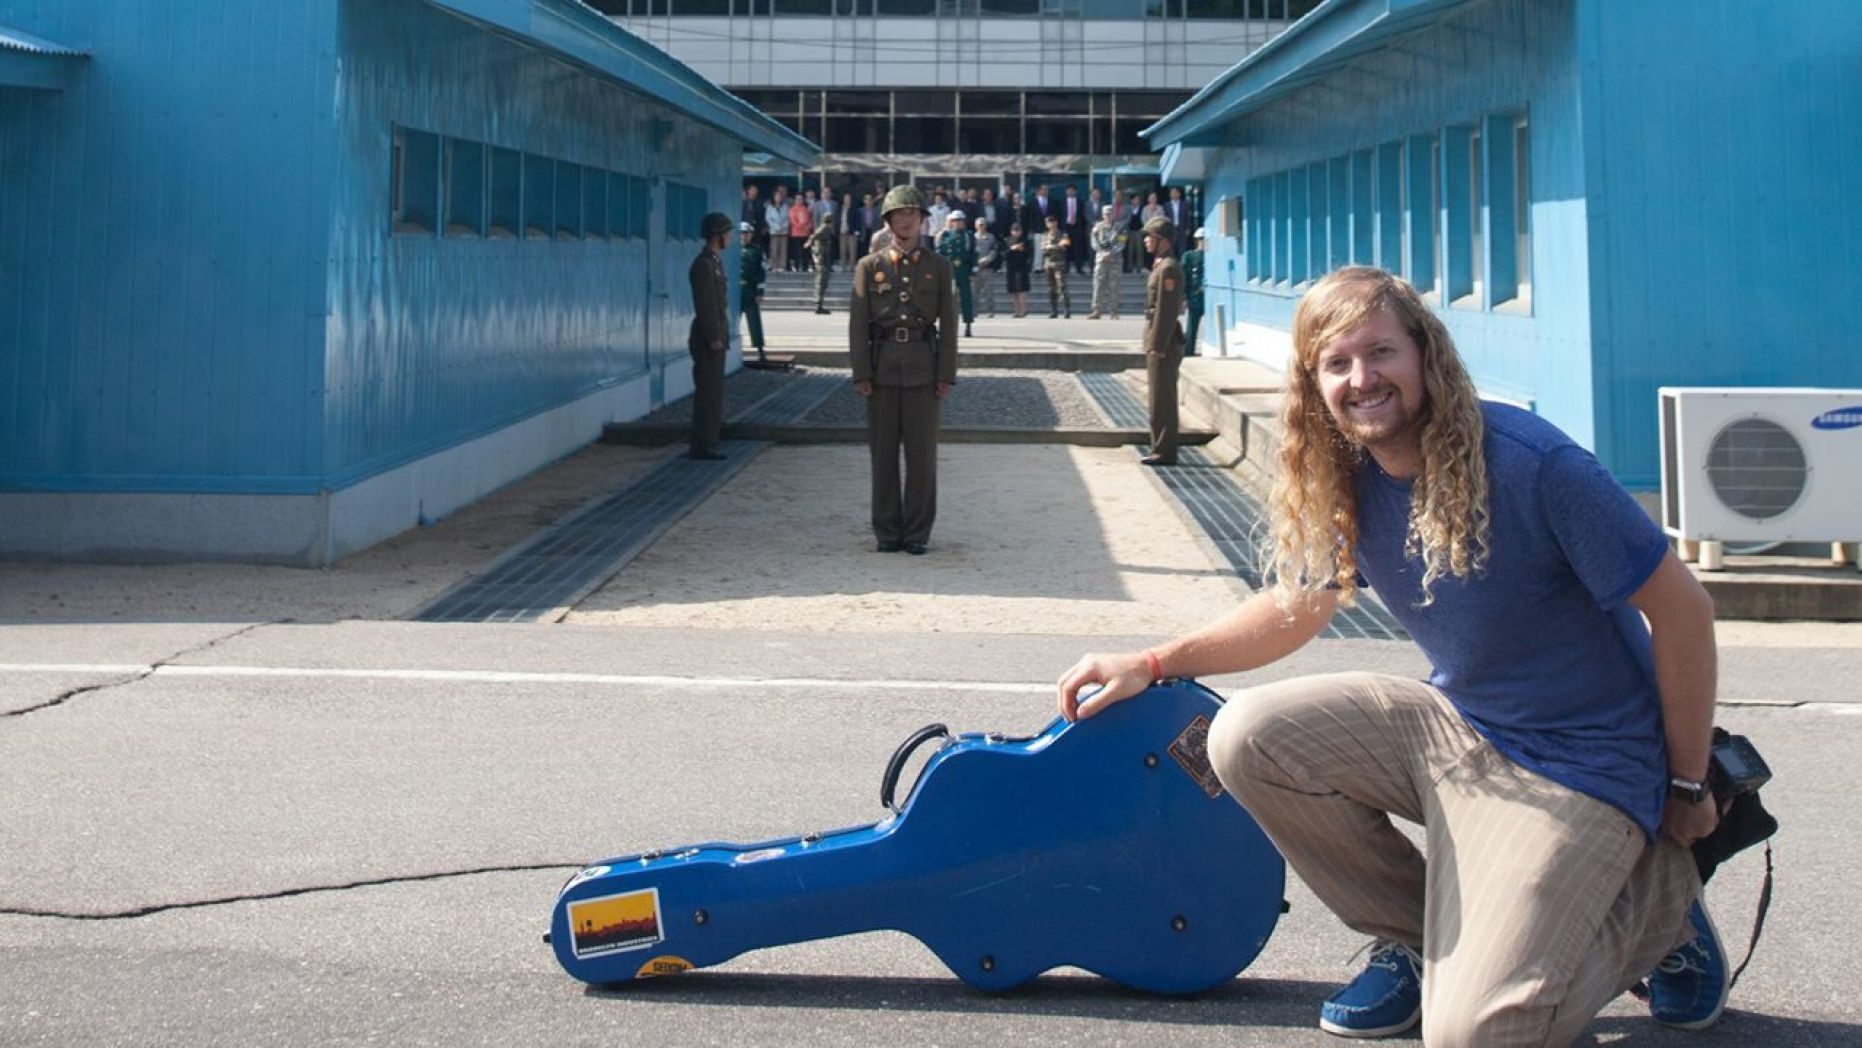 Sean Feucht Wrote Prophetic Lyrics from the Same Spot Trump and Kim Jong Un Made History At